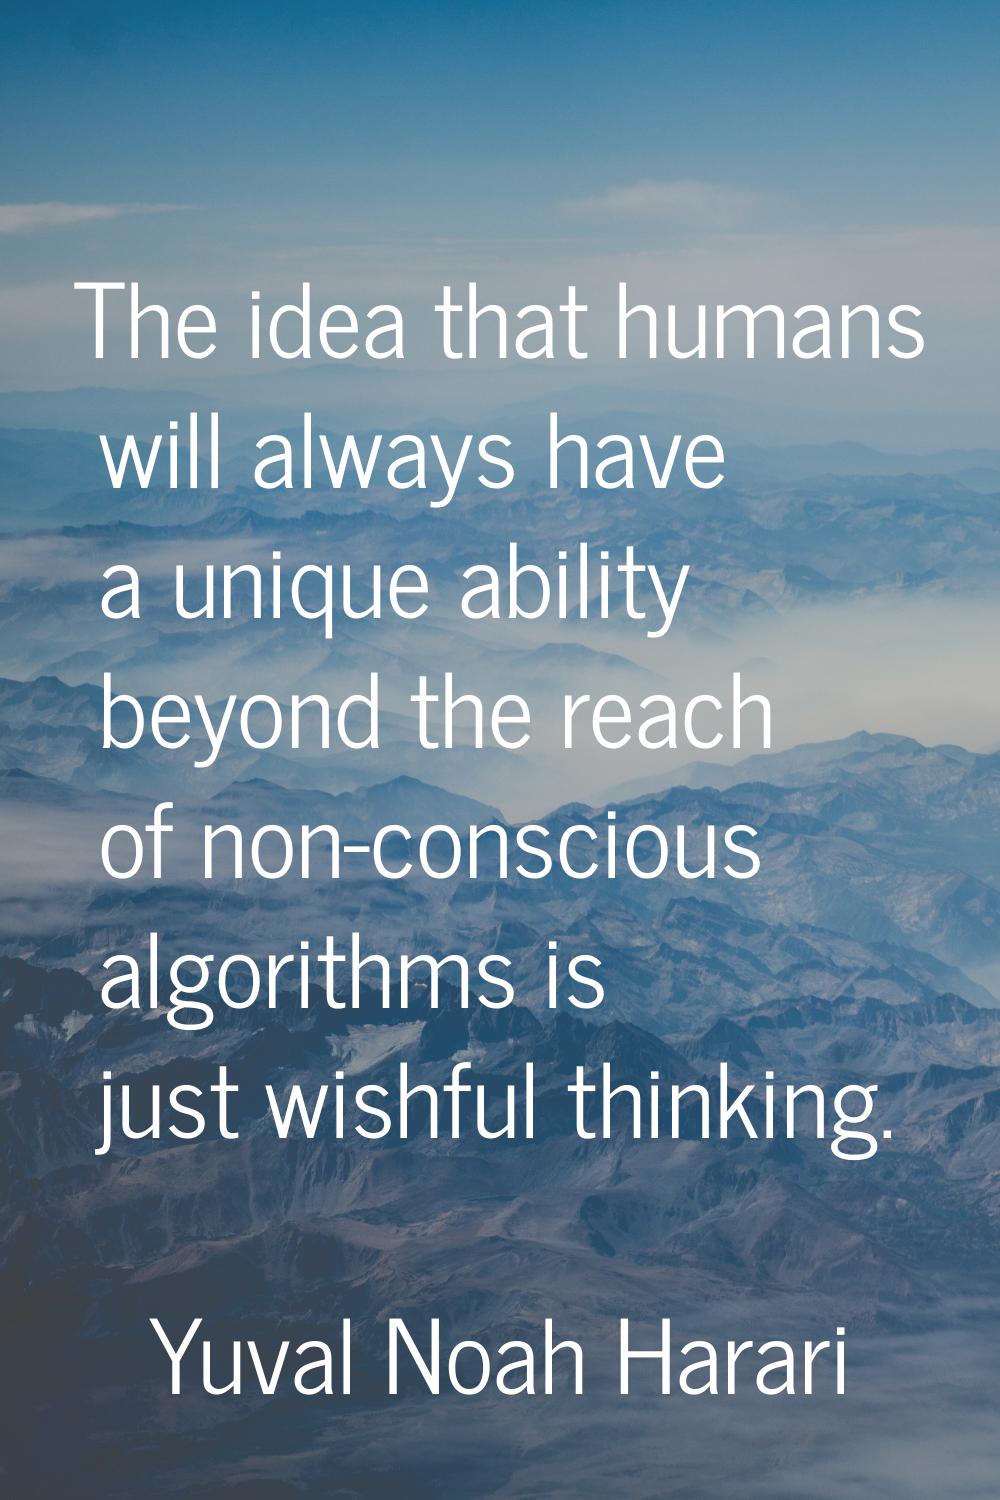 The idea that humans will always have a unique ability beyond the reach of non-conscious algorithms